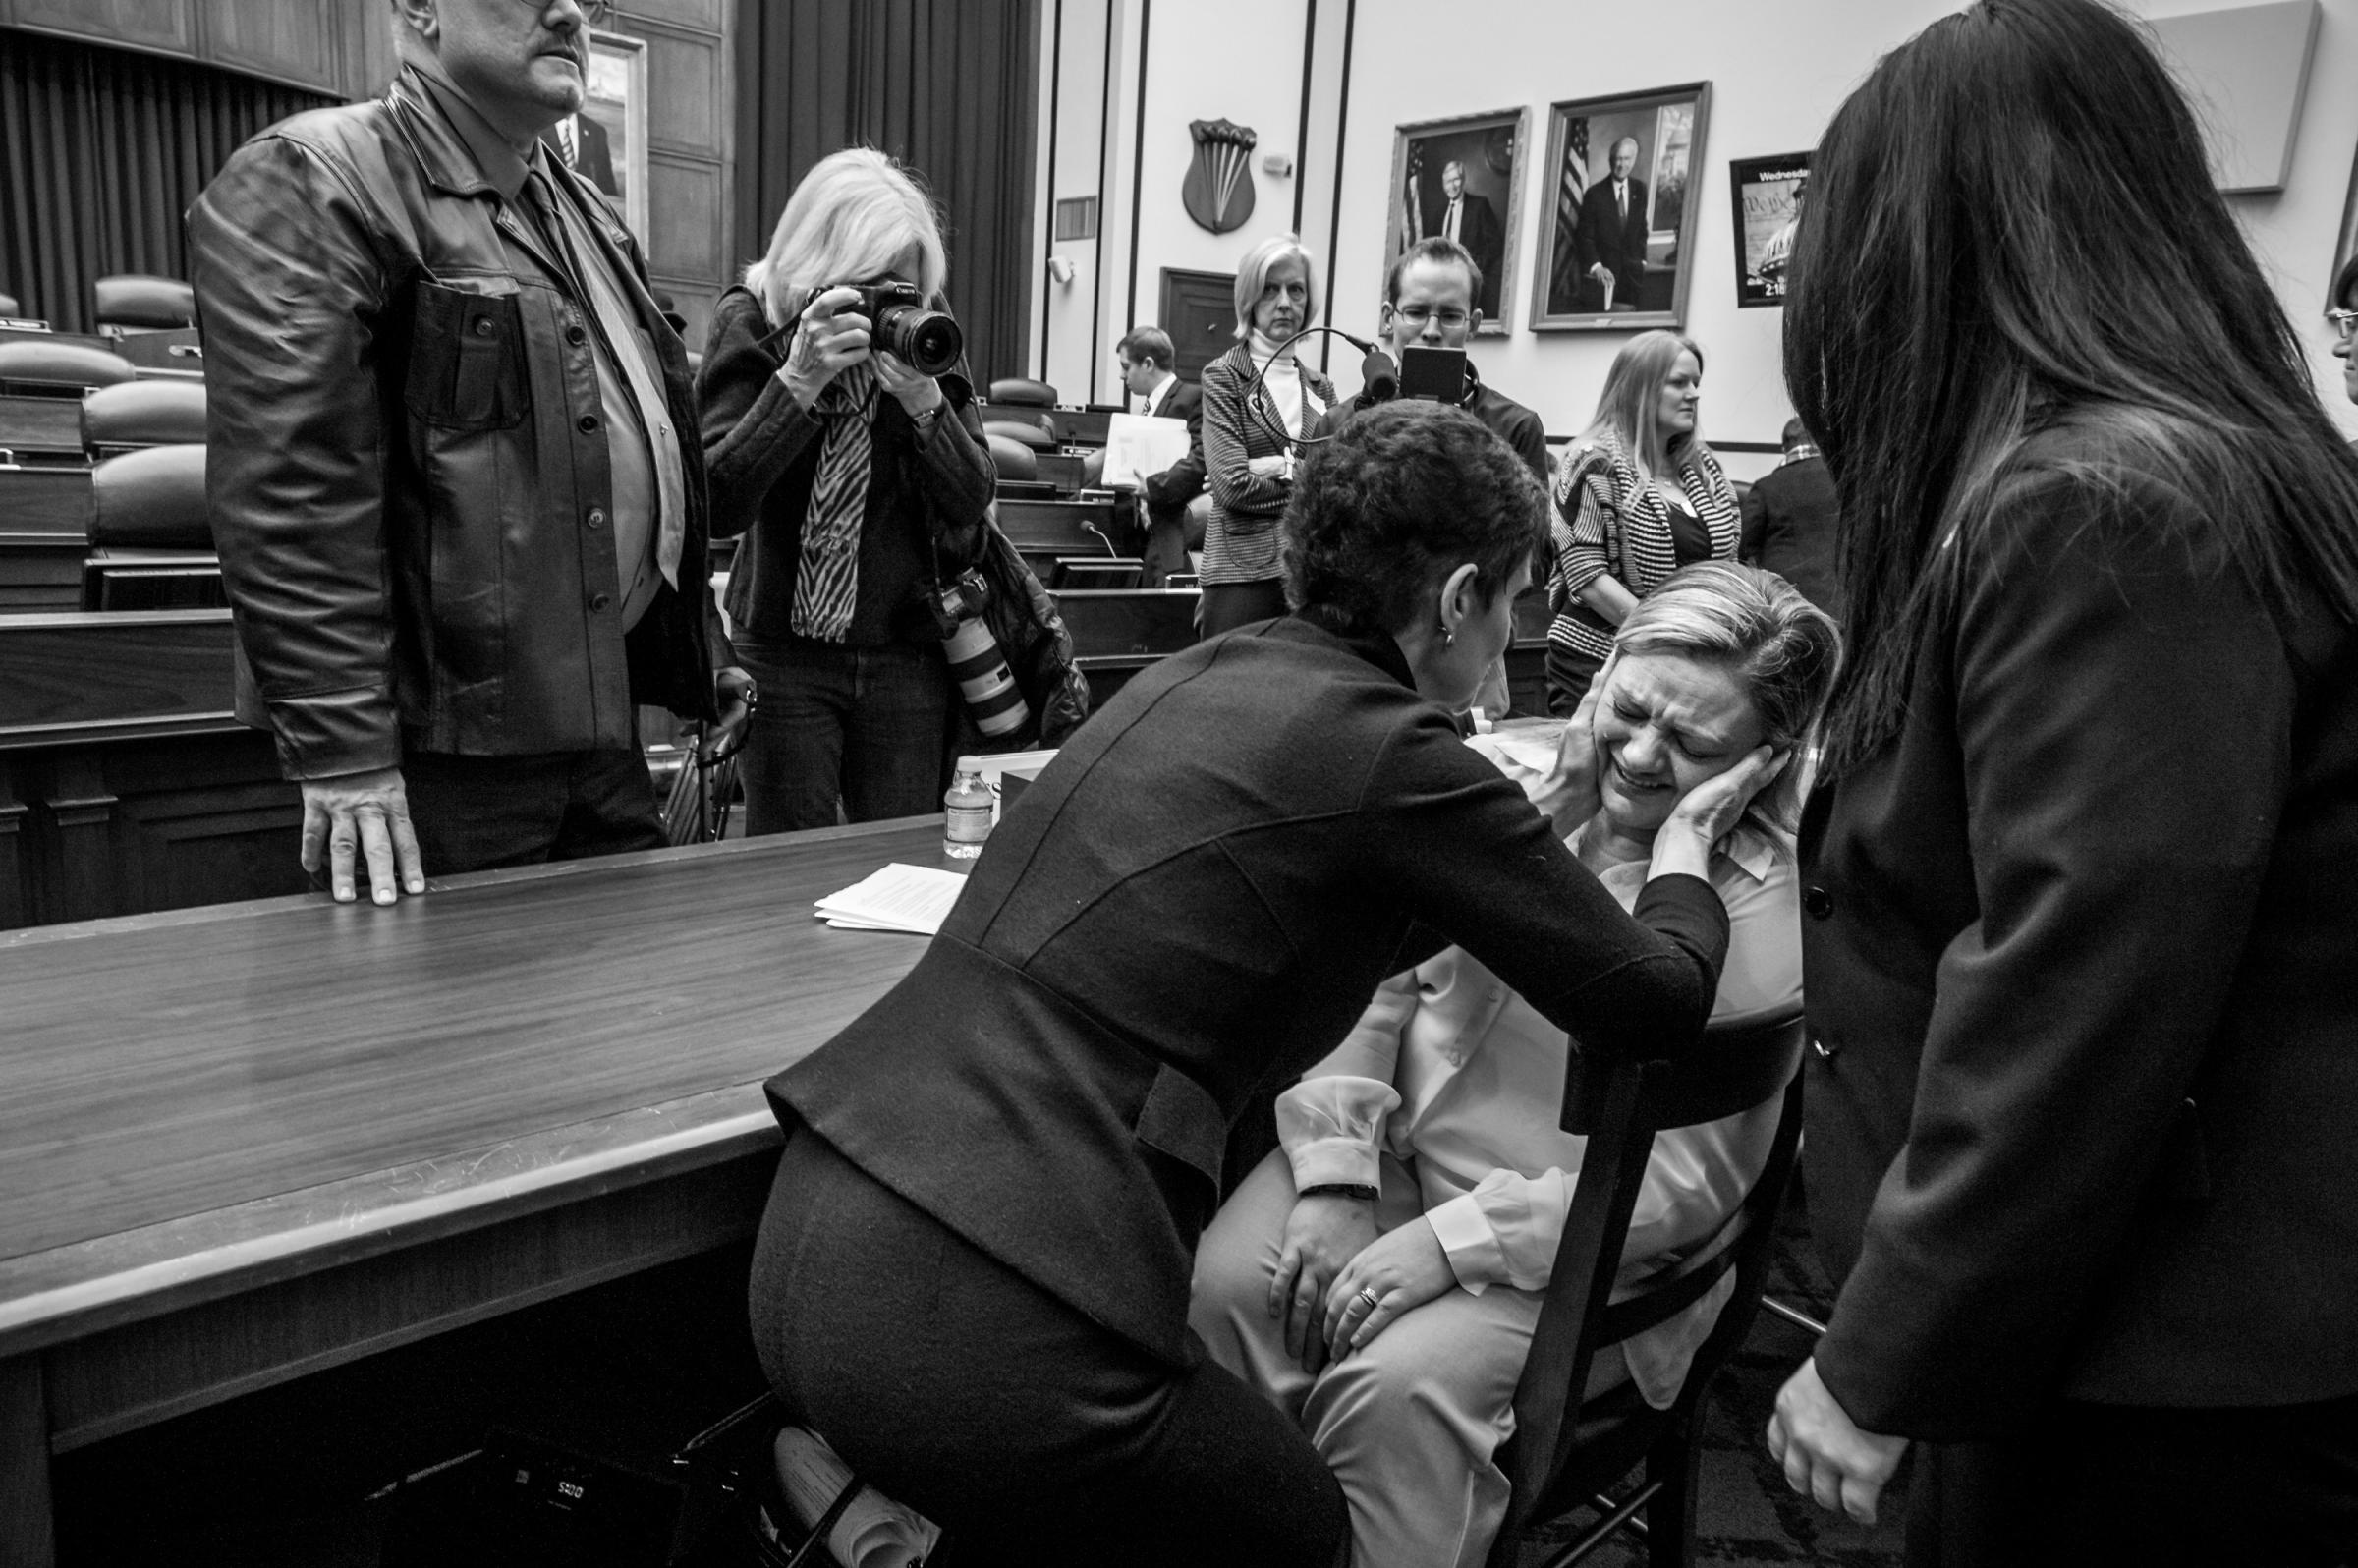 TSgt Jennifer Norris is comforted by Nancy Parrish, President, Protect Our Defenders, after testifying before the sparsely attended House Armed Services Committee hearing on Capitol Hill, to discuss sexual misconduct by basic training instructors at Lackland Air Force Base in San Antonio, Texas.